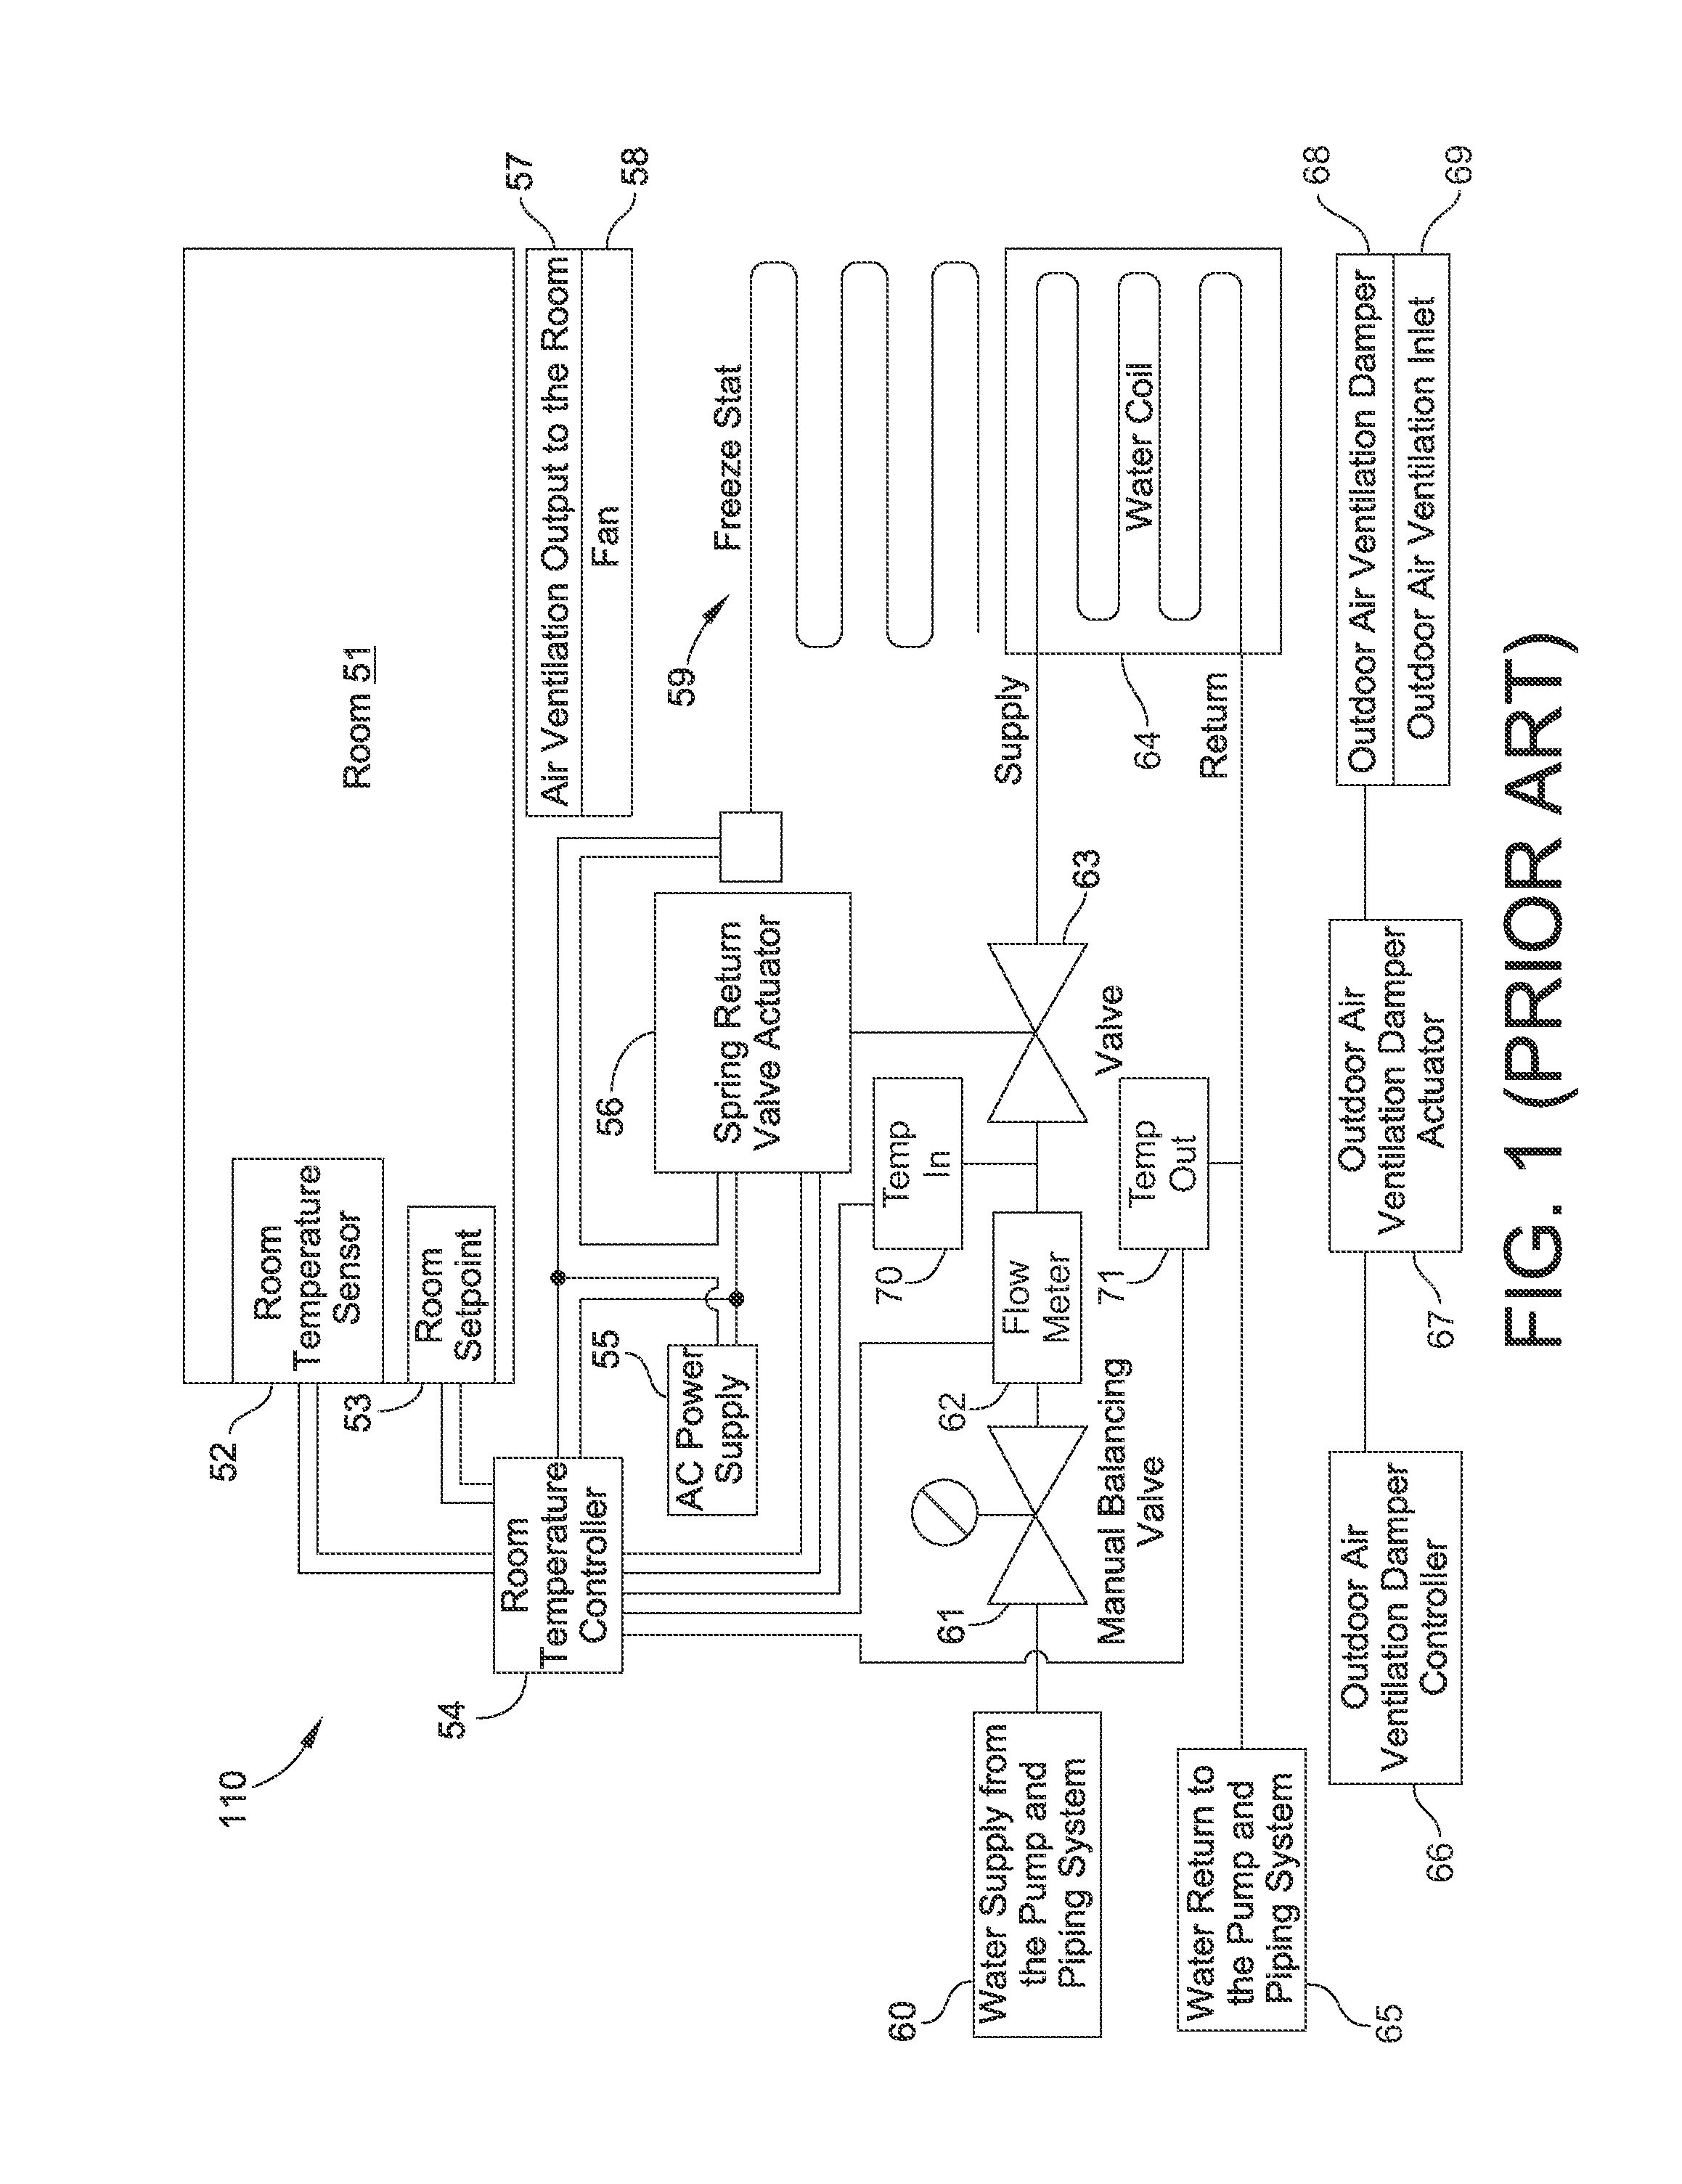 Advanced valve actuator with integral energy metering